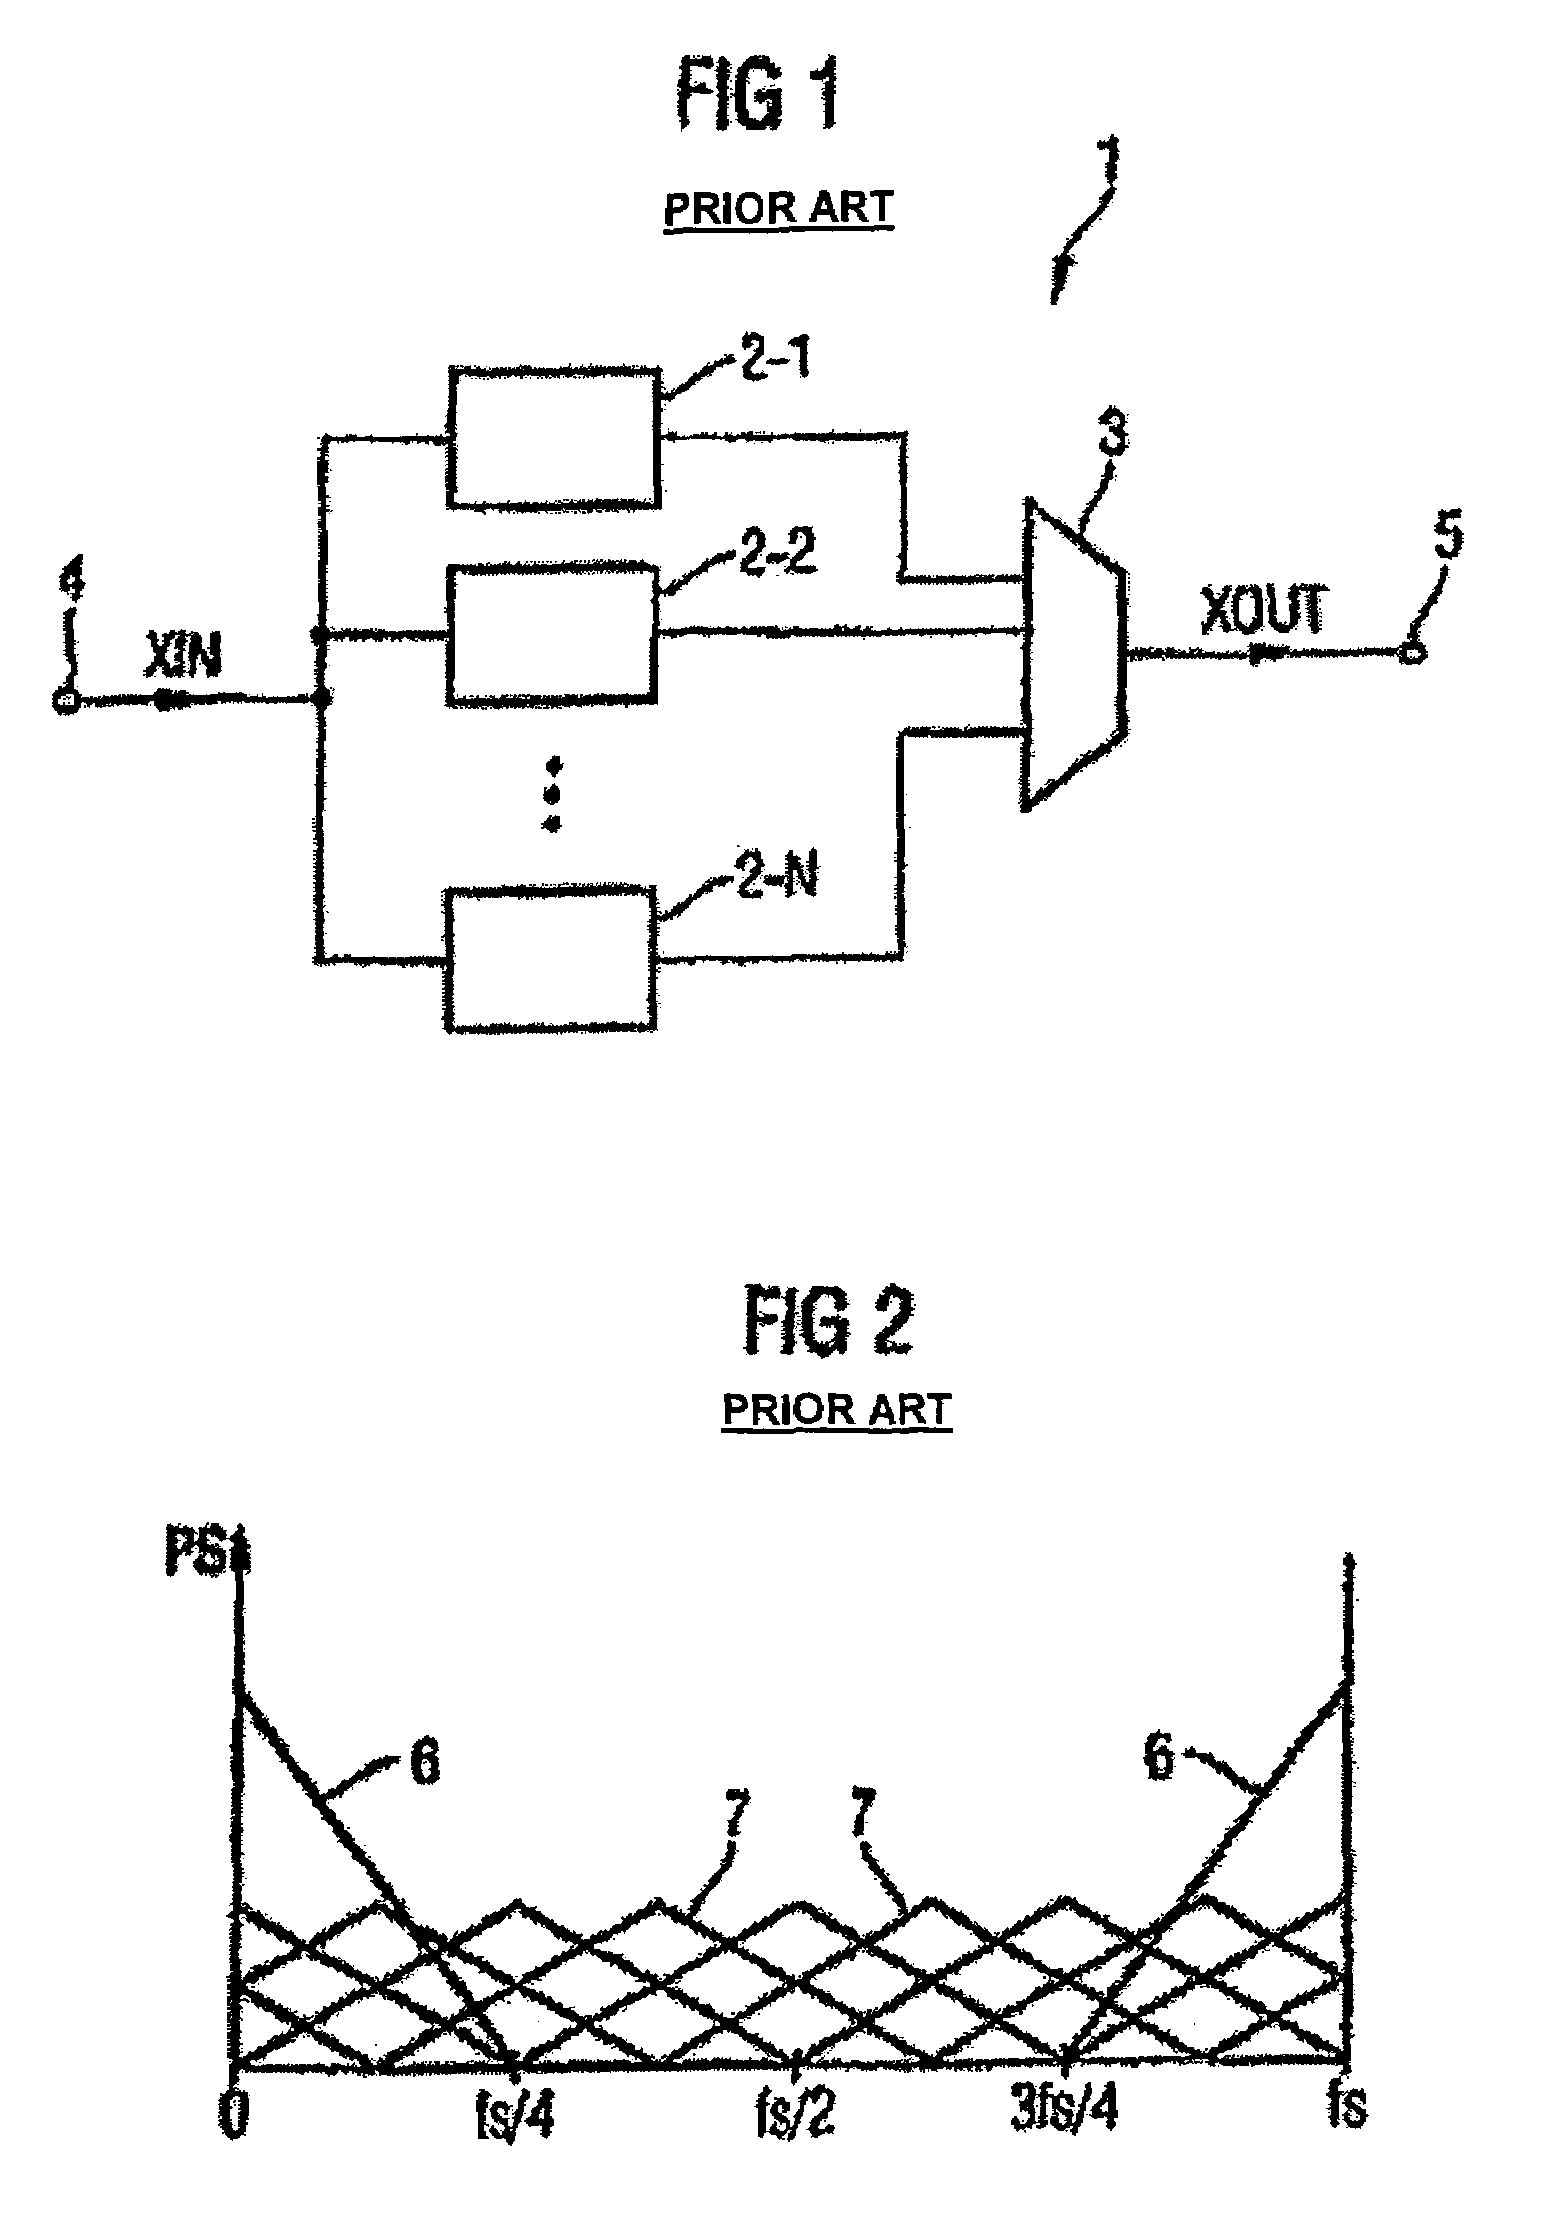 Analog-to-digital converter operable with staggered timing